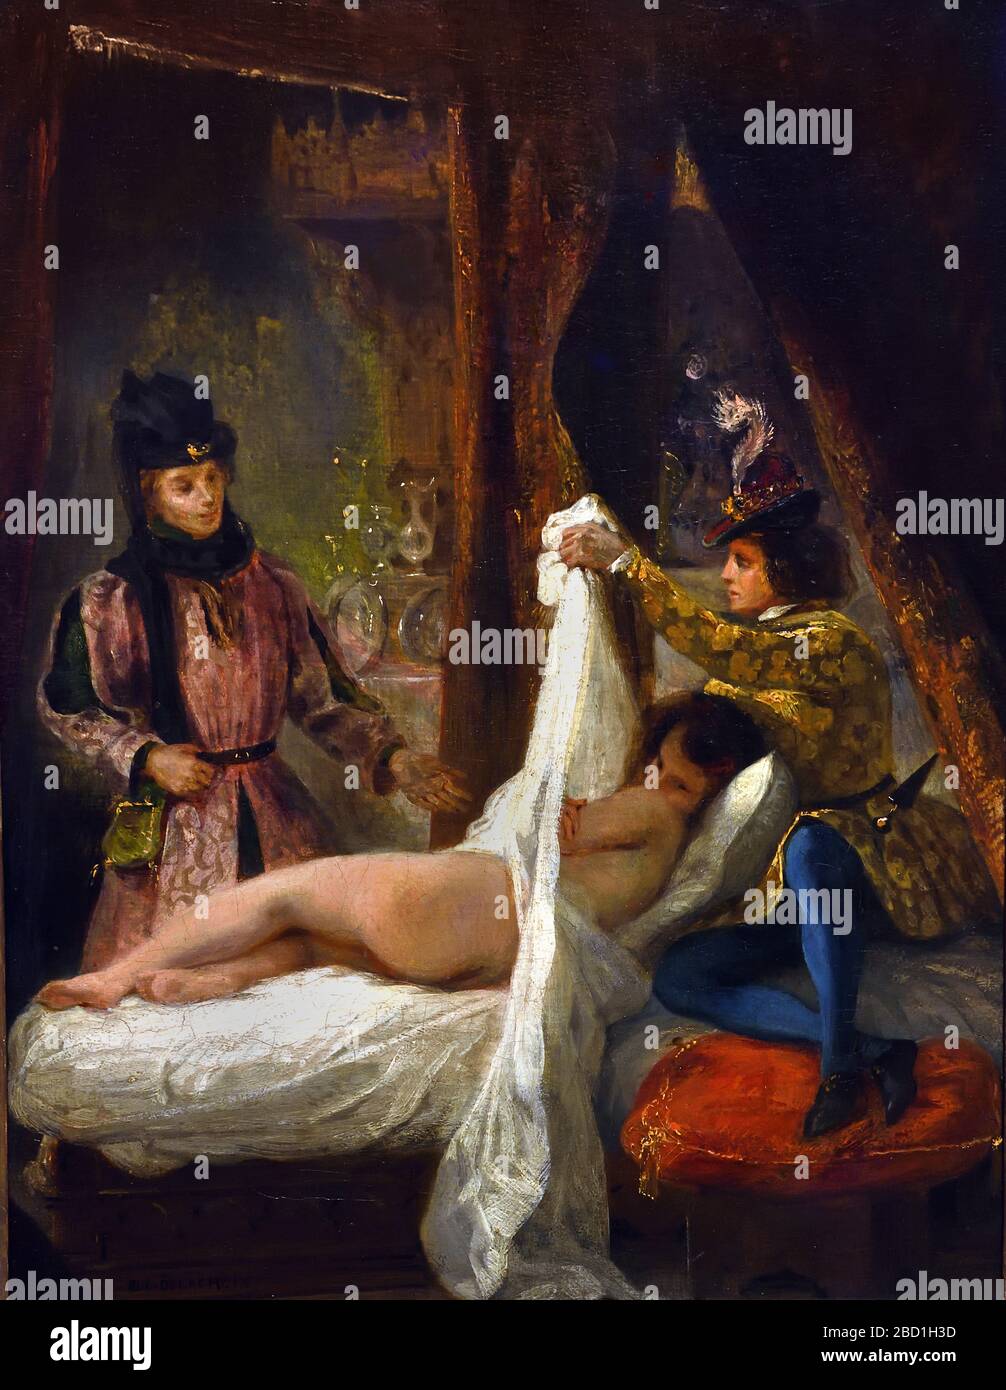 The Duke of Orleans showing his Lover 1825-1826 Eugène Delacroix 1798 - 1863, France, French, Stock Photo